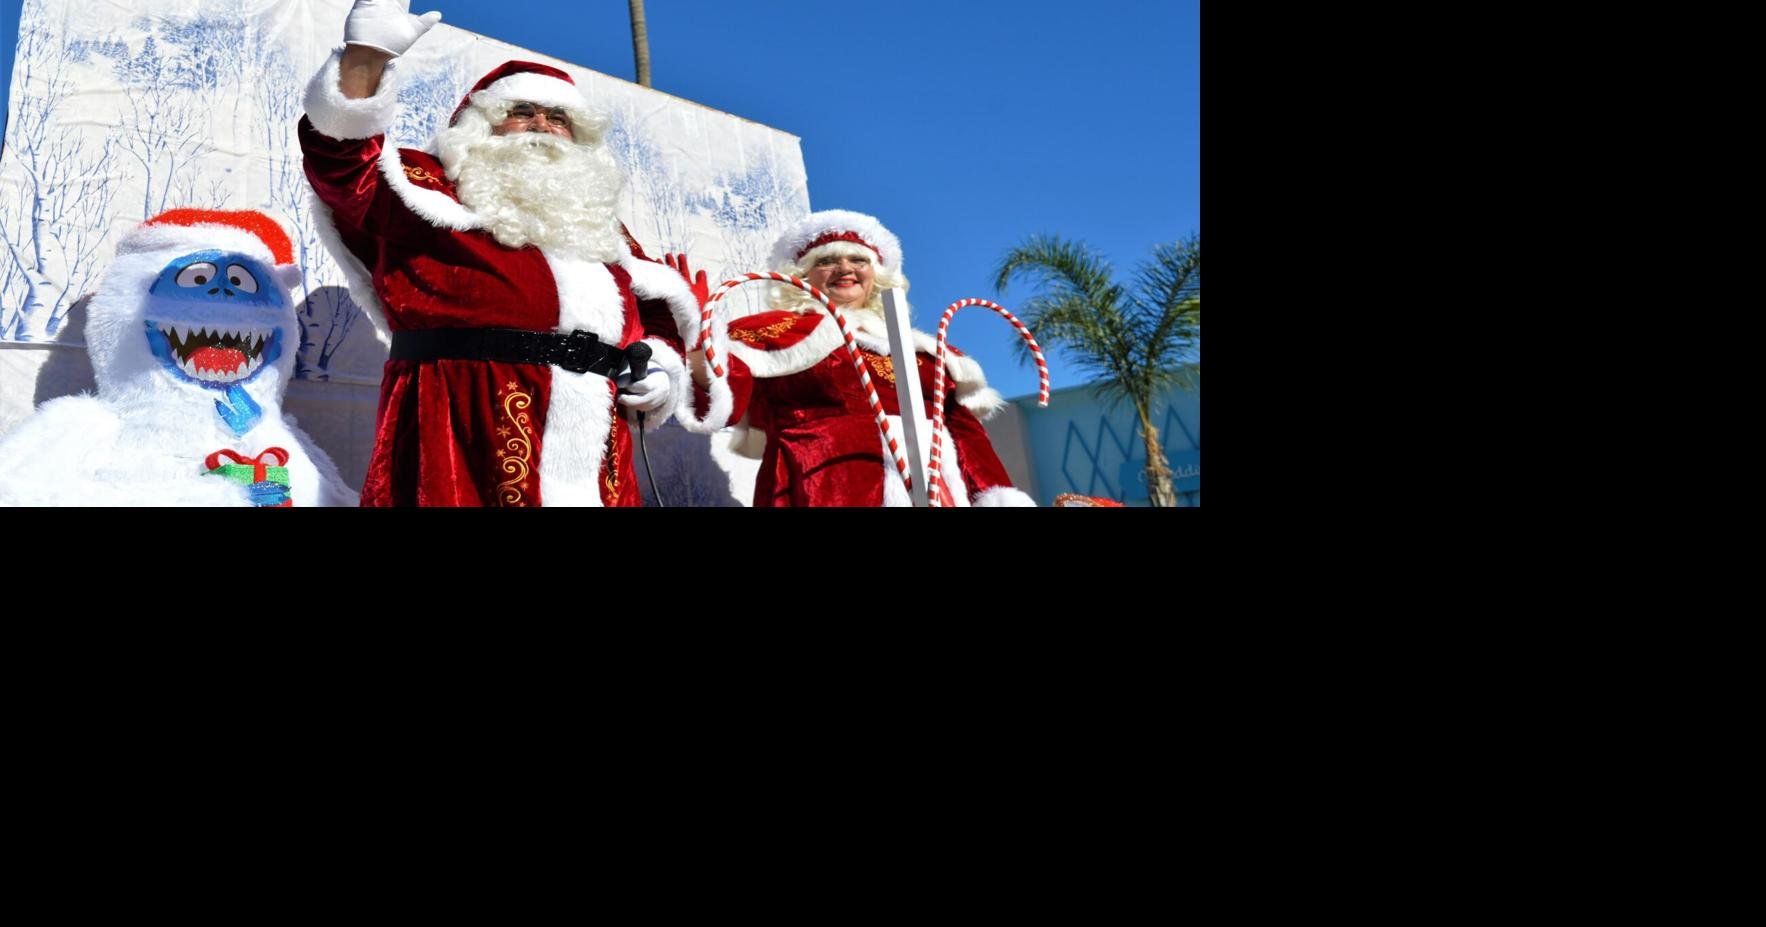 Fontana Christmas Parade is returning; participants can sign up now